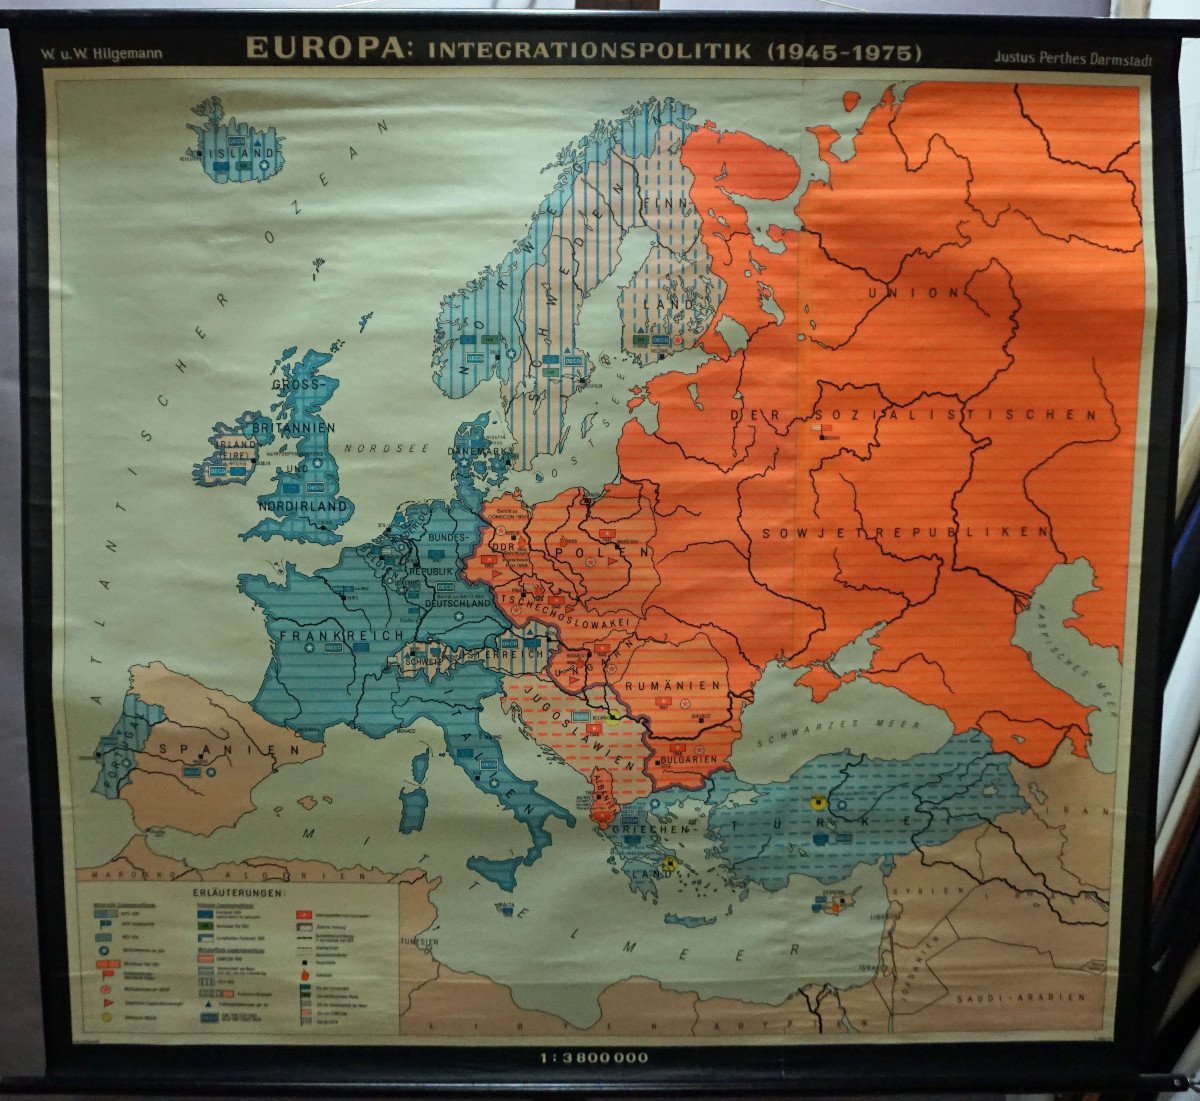 Roll Up Wall Map Of Europe Integration Policy 1945-1975 Wall Chart